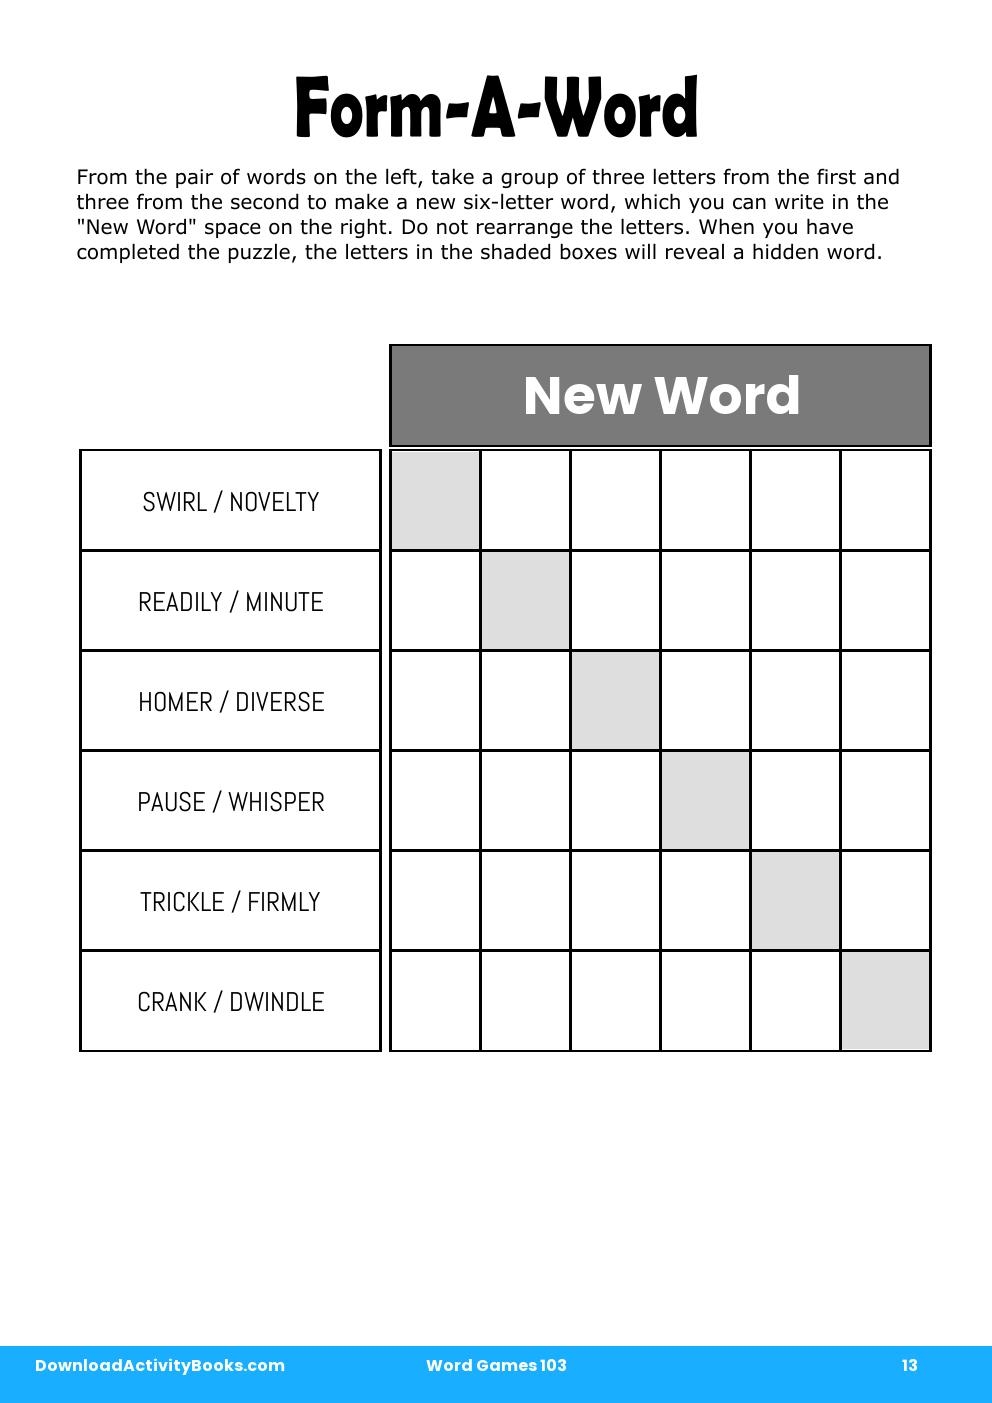 Form-A-Word in Word Games 103